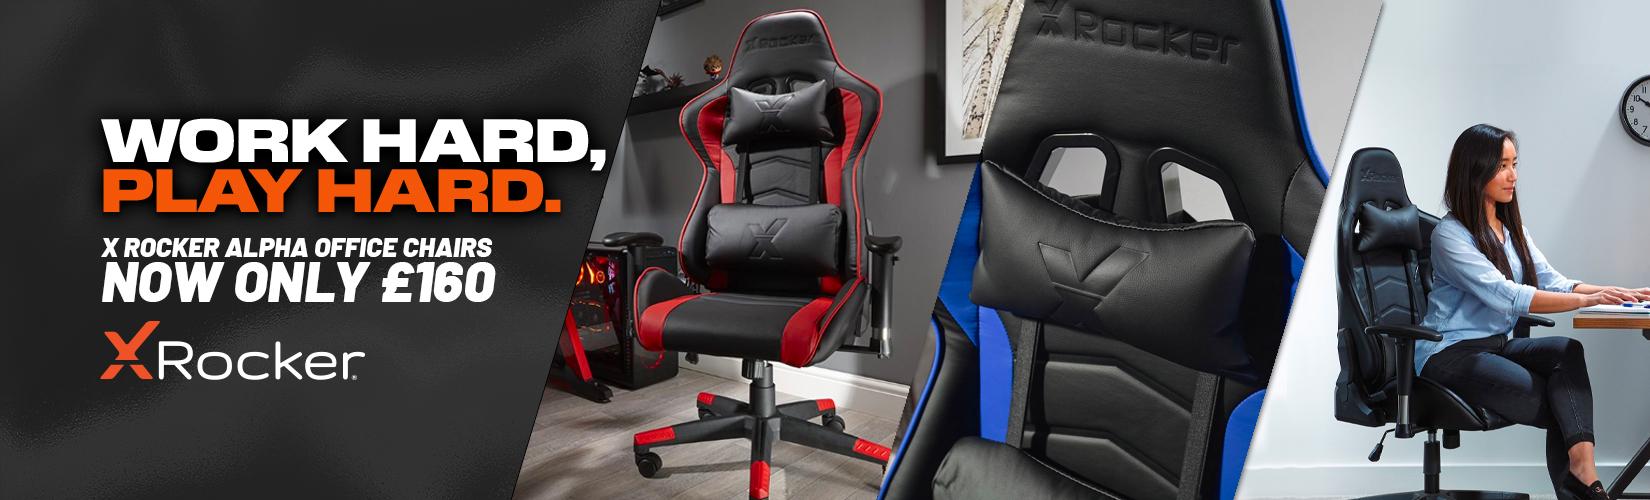 Work hard play hard. X Rocker Alpha office chairs. Now only £160.